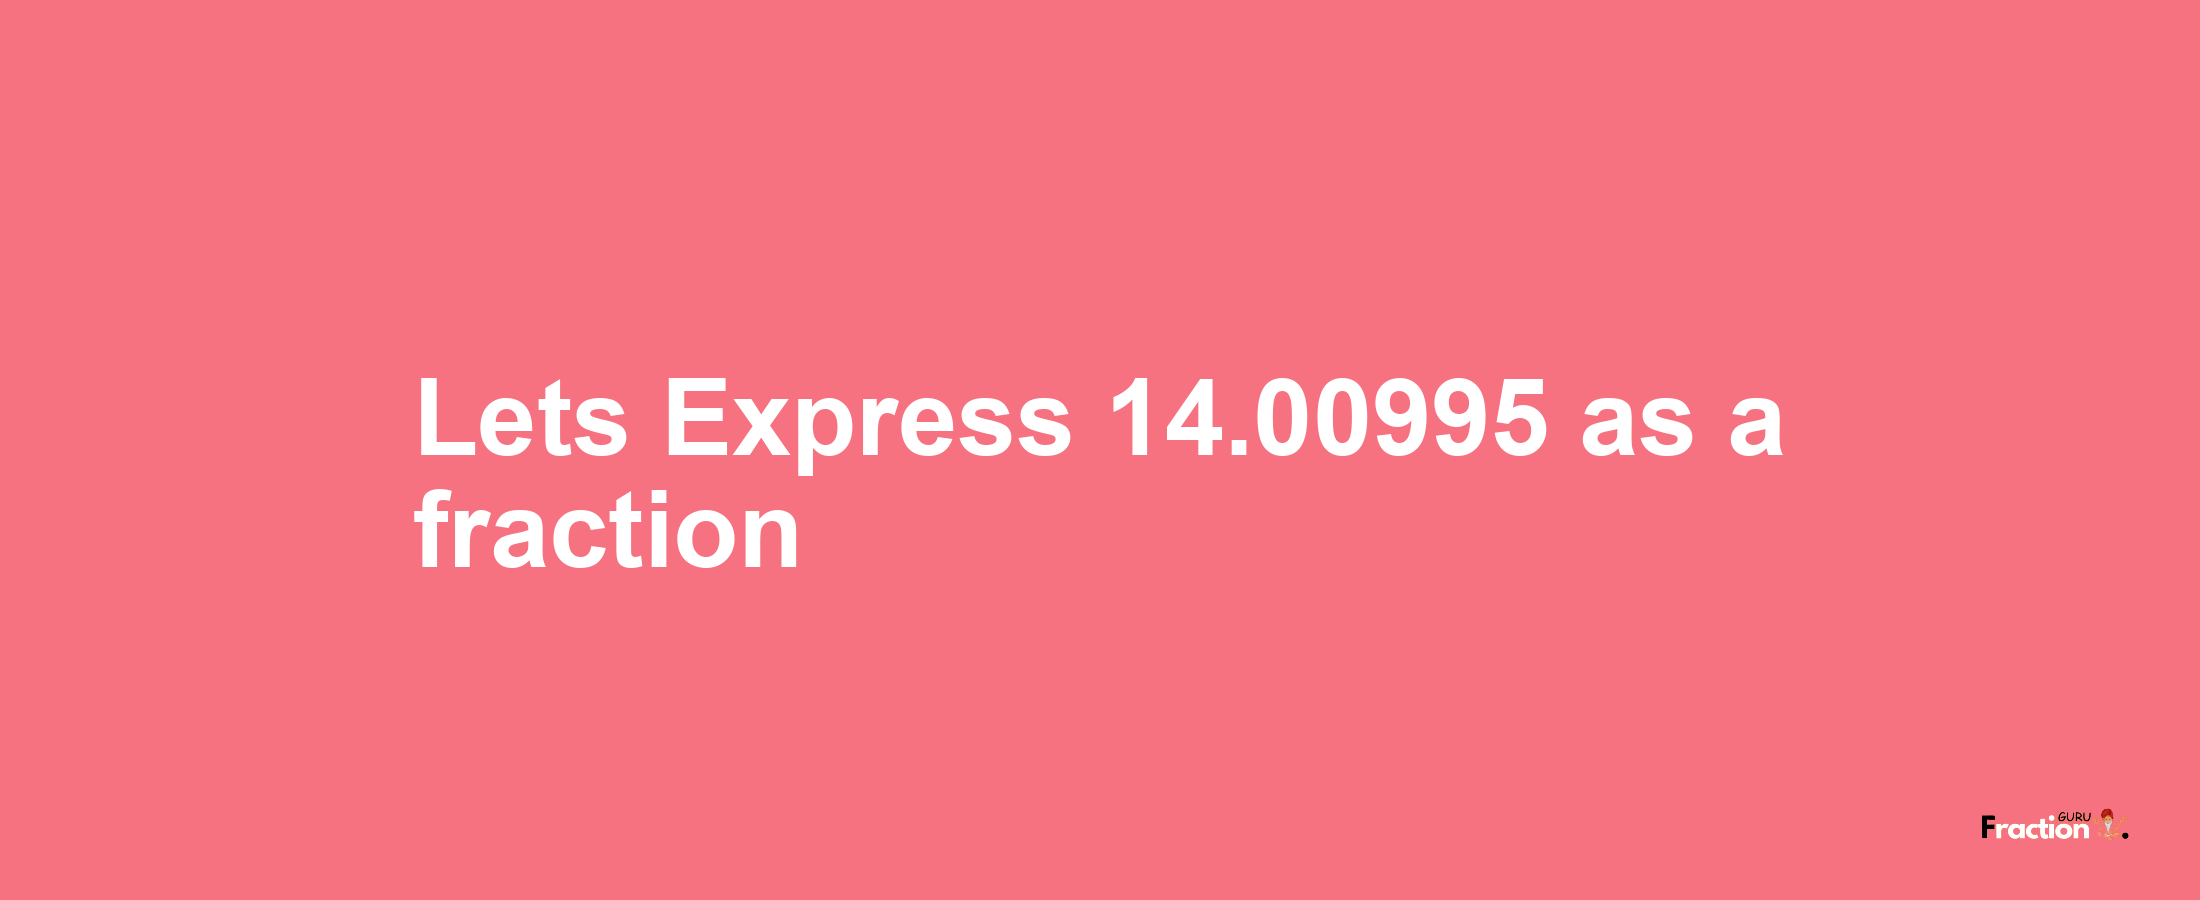 Lets Express 14.00995 as afraction